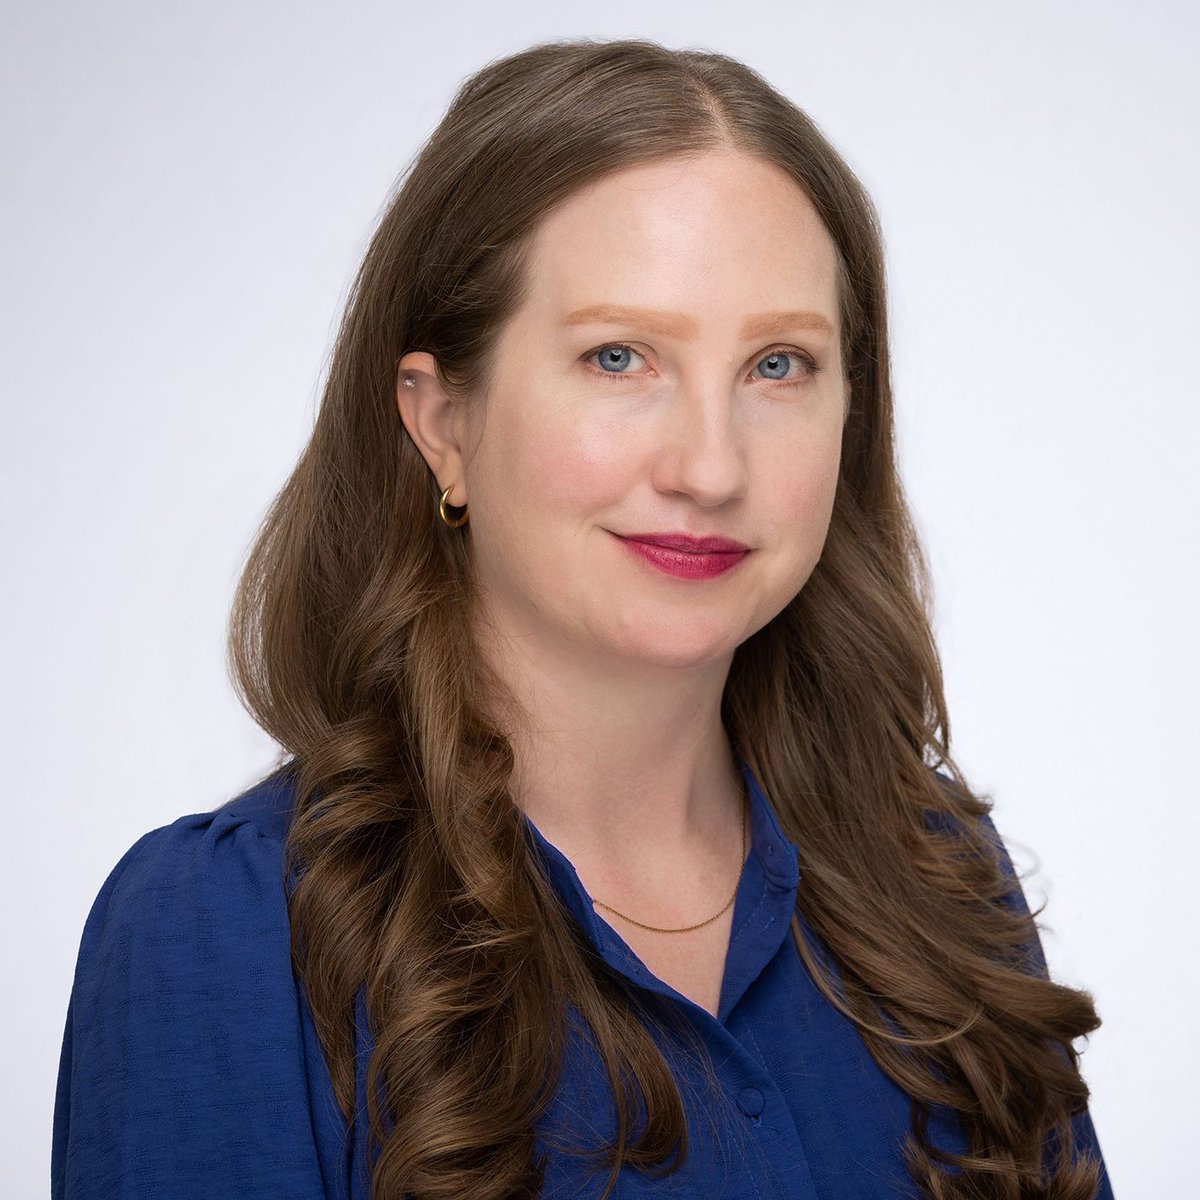 Dr. Kristy A. Robinson, ECP, has received the Canadian Psychological Association (CPA) President’s New Researcher Award. This award recognizes the exceptional quality of her contributions to psychological knowledge in Canada as an early career researcher. mcgill.ca/x/wTS